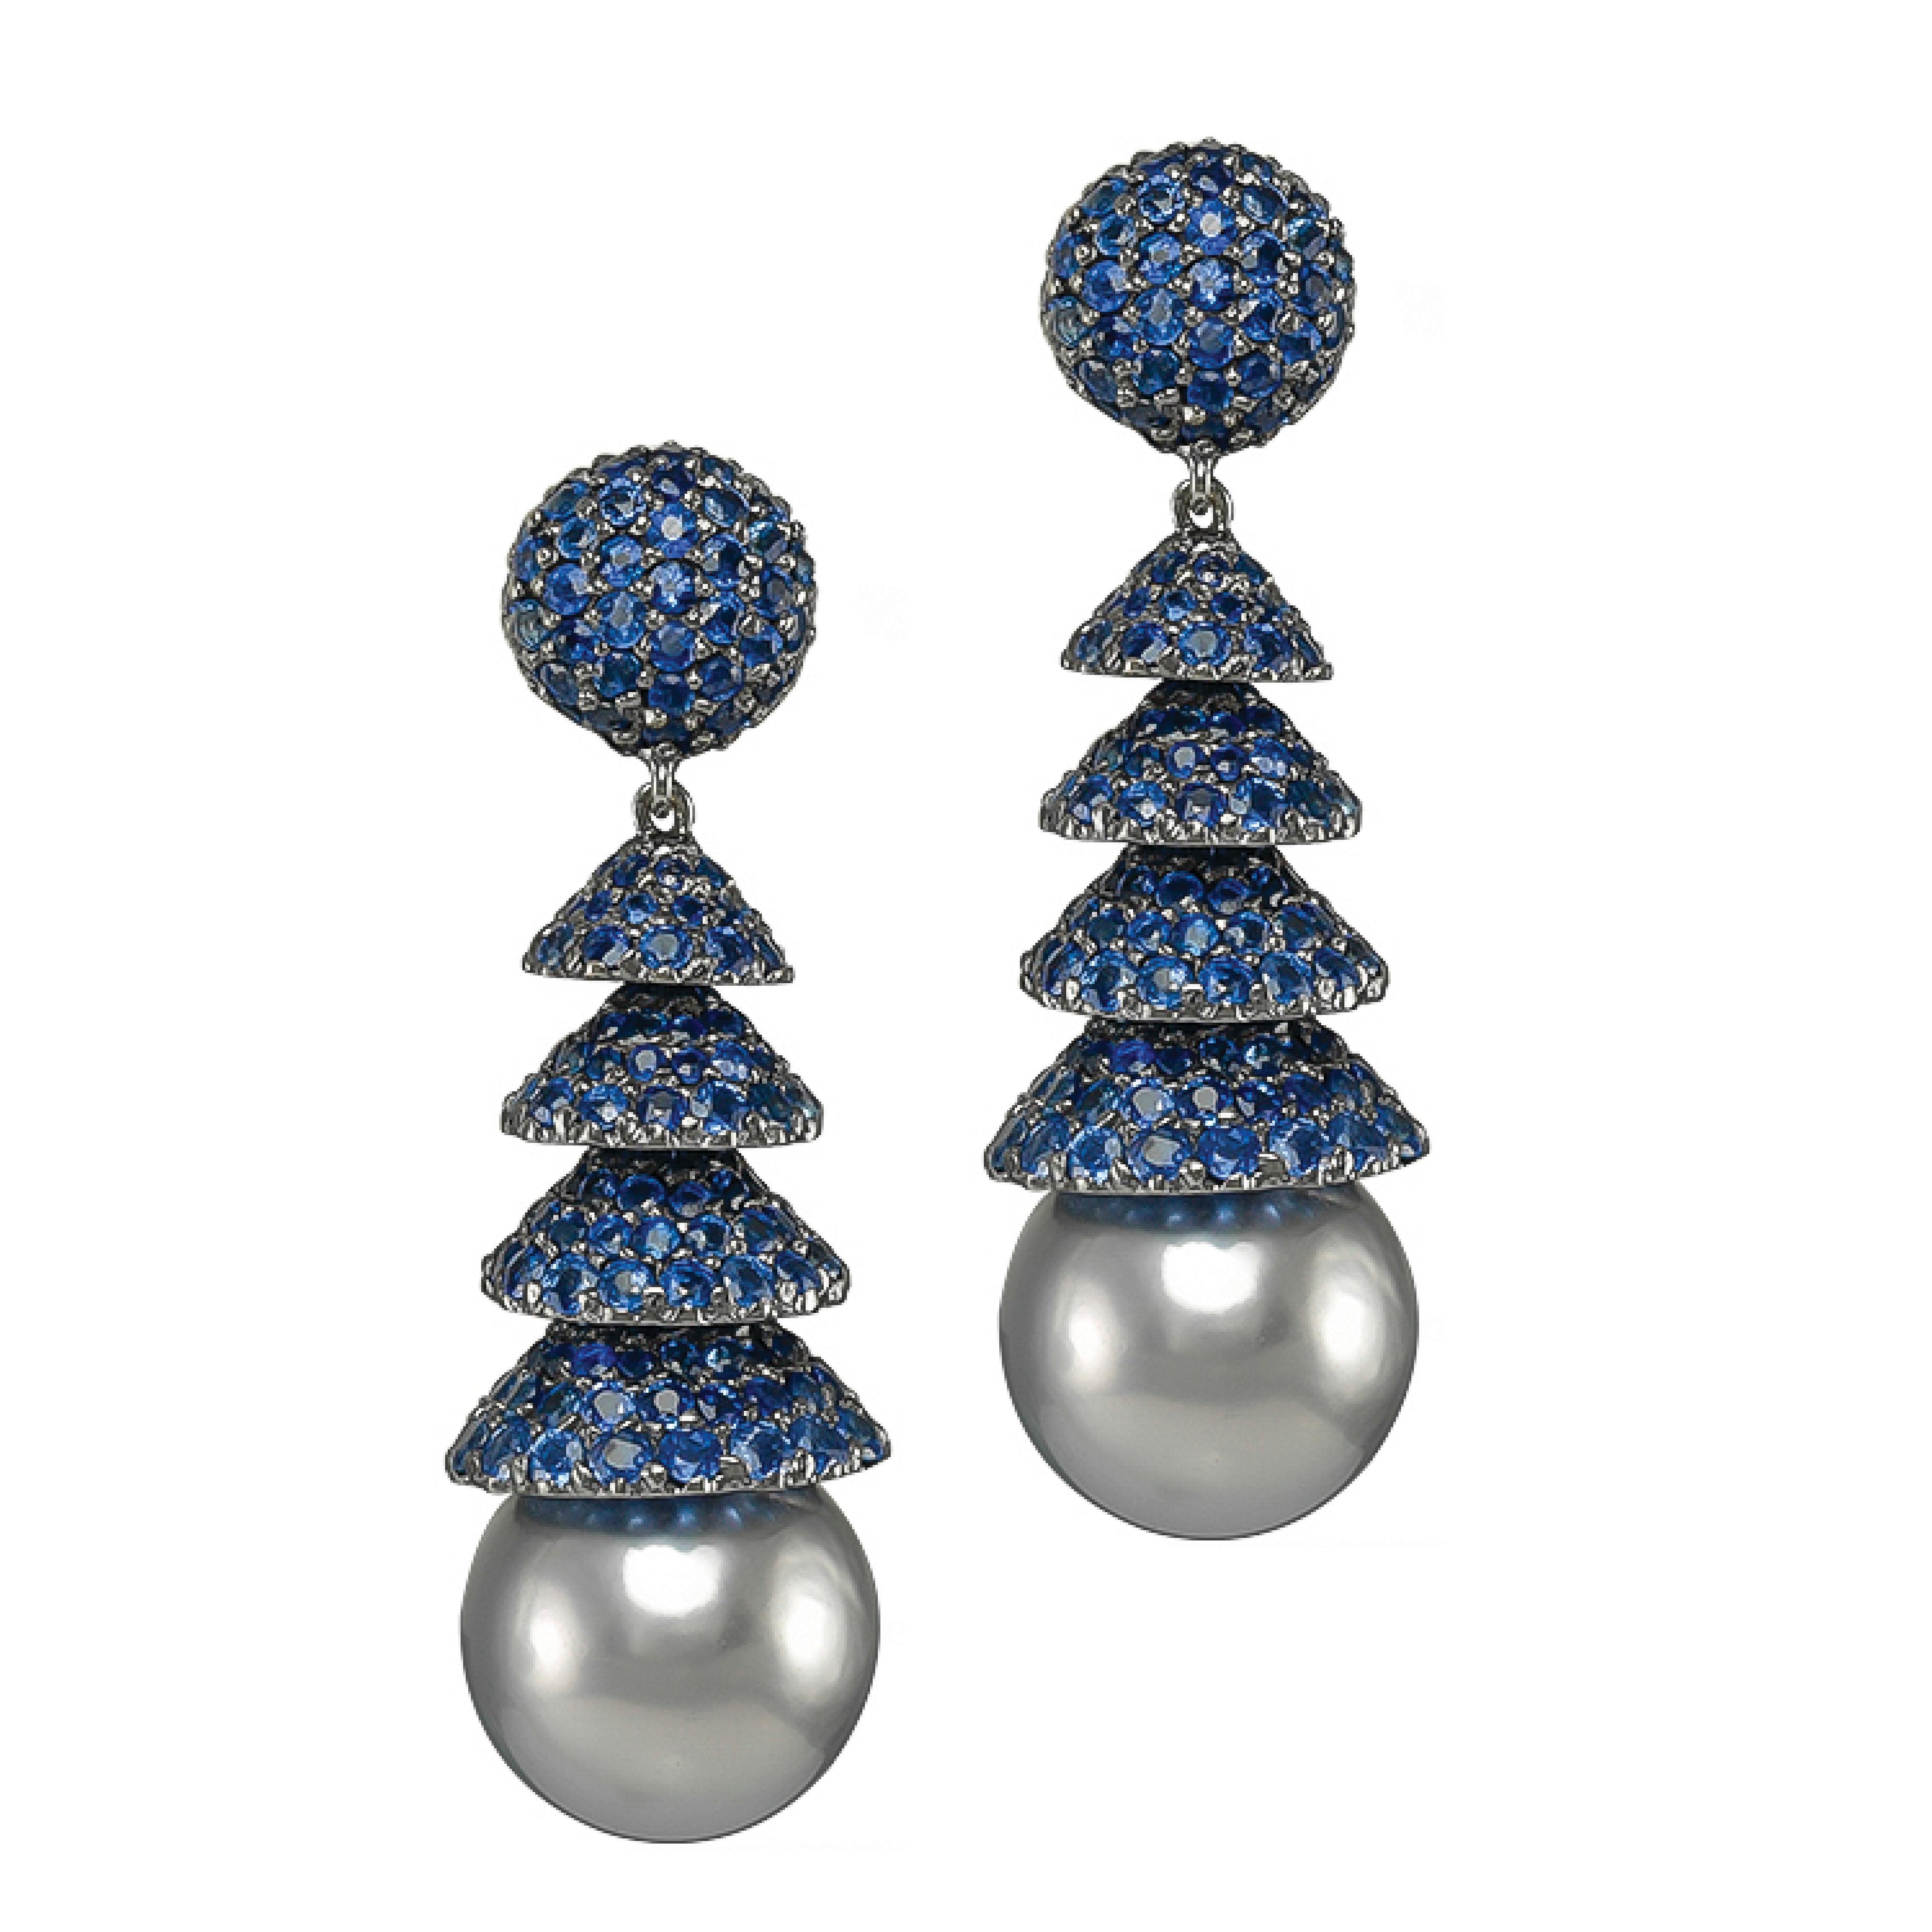 Pair of 18K White Gold drop earrings that features blue sapphires weighing 16.16 carats with Black Pearls.

Sophia D by Joseph Dardashti LTD has been known worldwide for 35 years and are inspired by classic Art Deco design that merges with modern